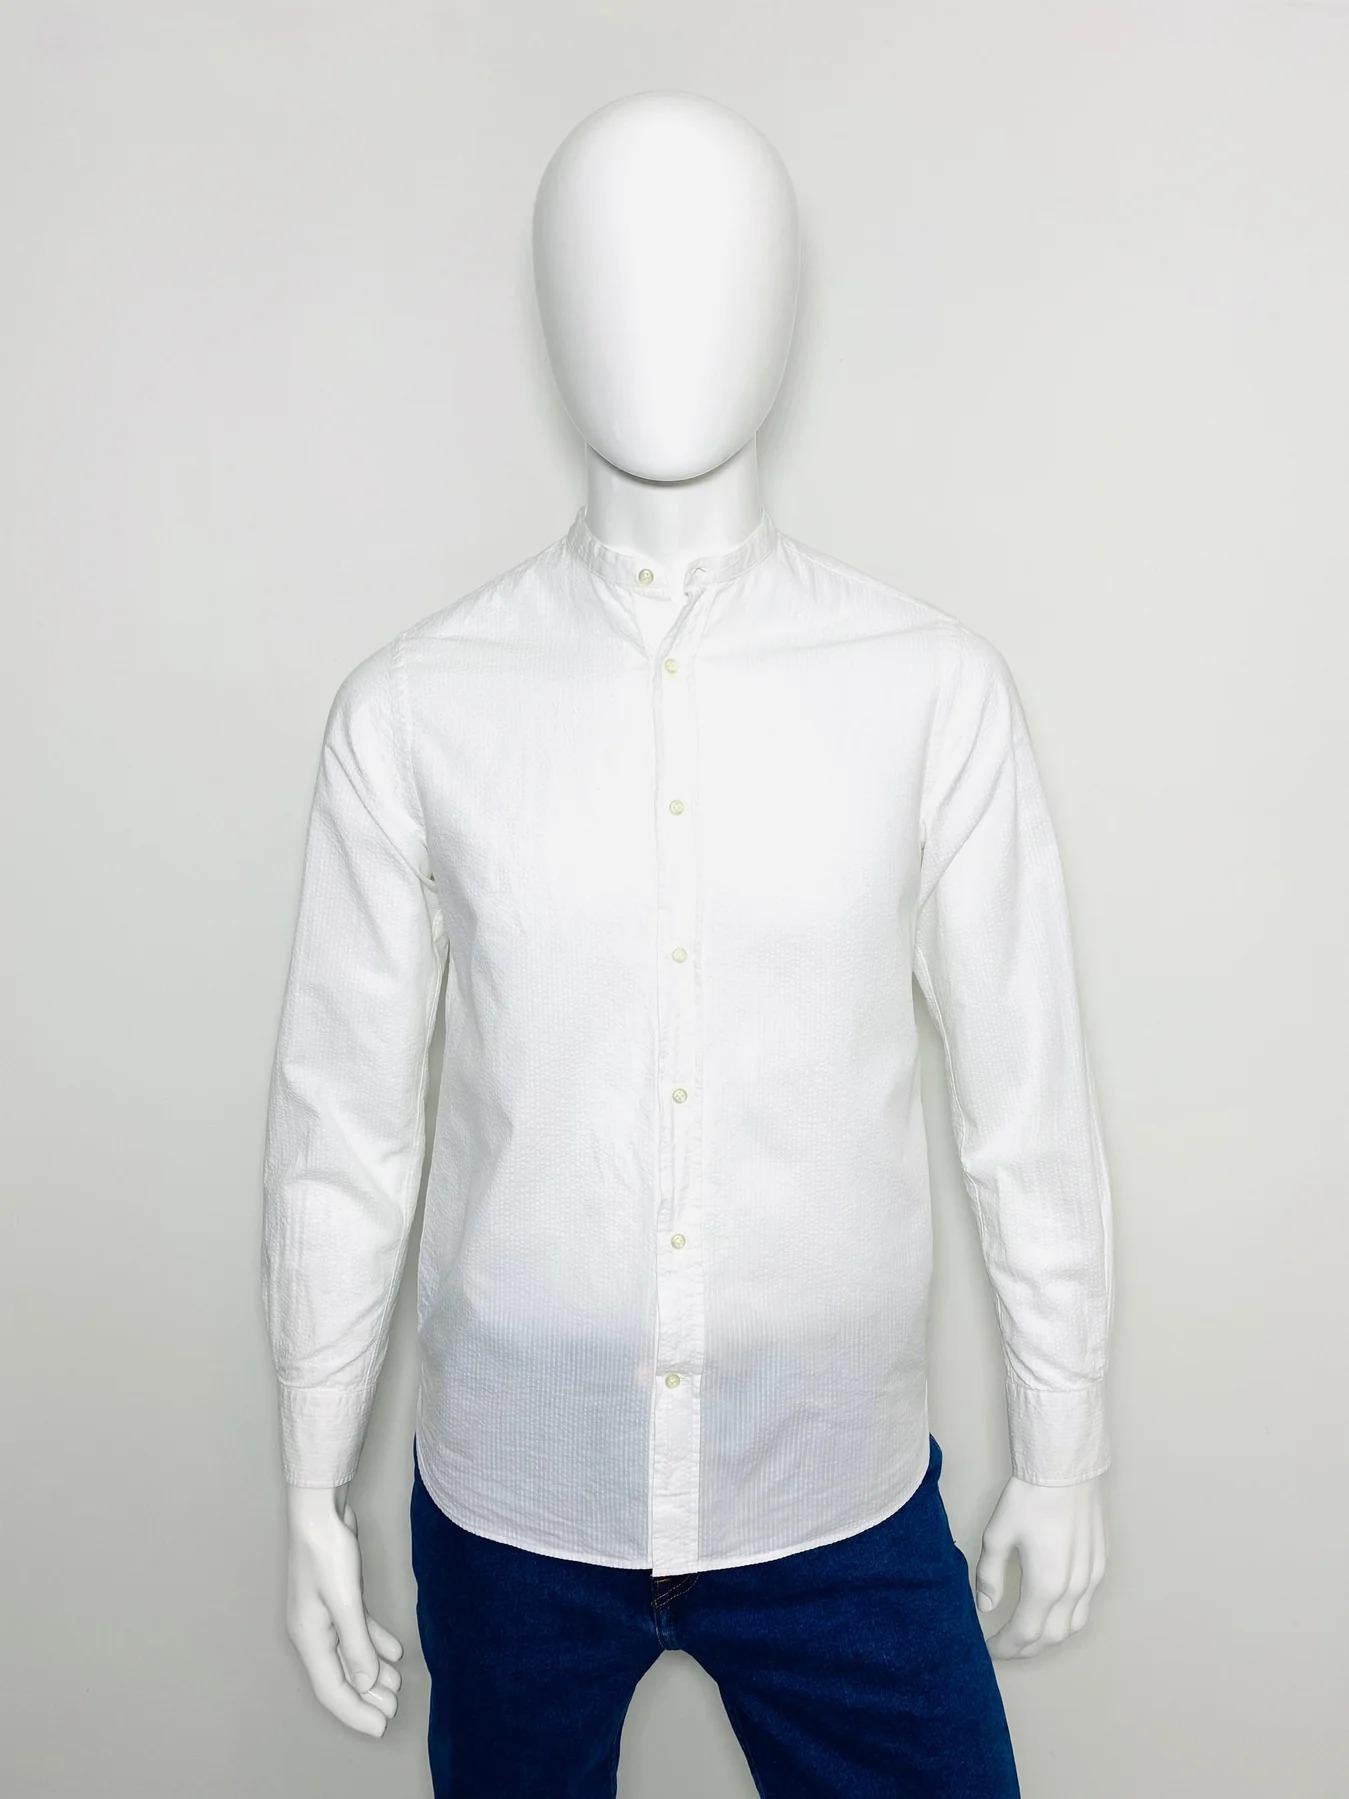 Officine Generale Cotton Shirt In Excellent Condition For Sale In London, GB